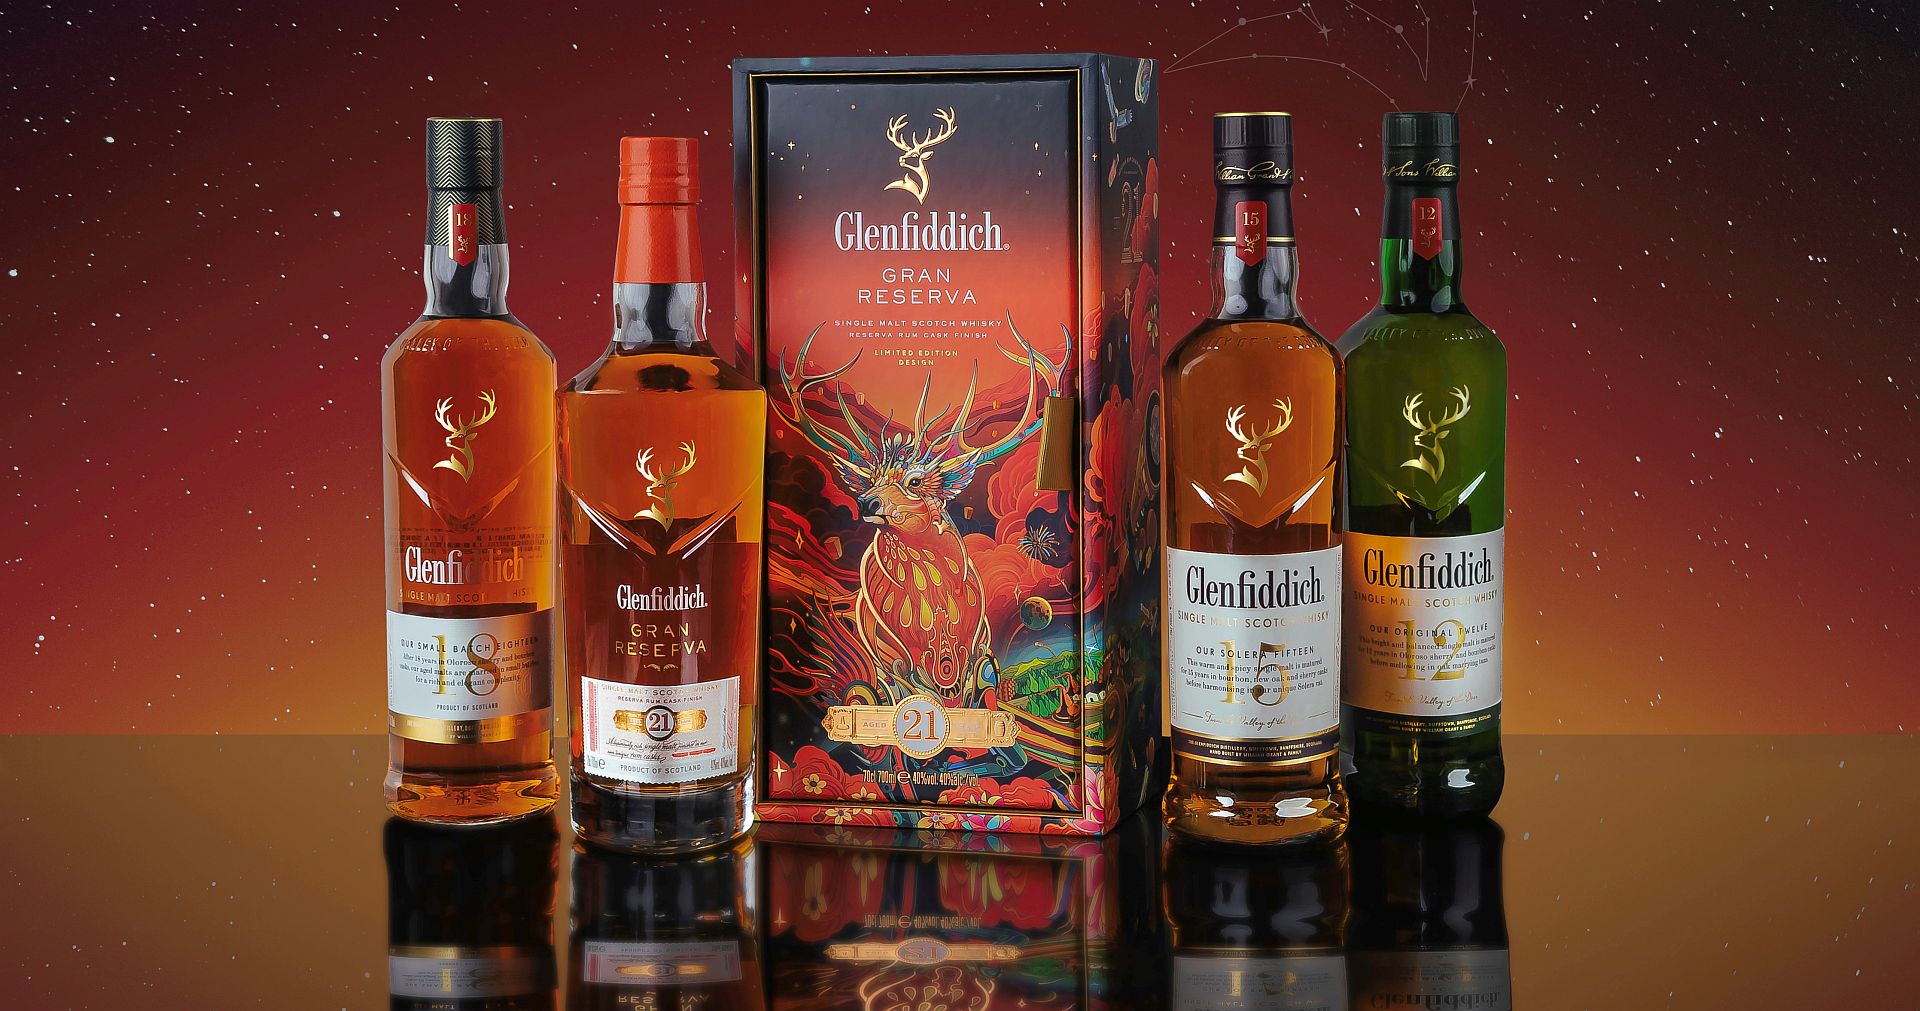 Glenfiddich Completes Its Artistic Trilogy with The Cosmic Voyage